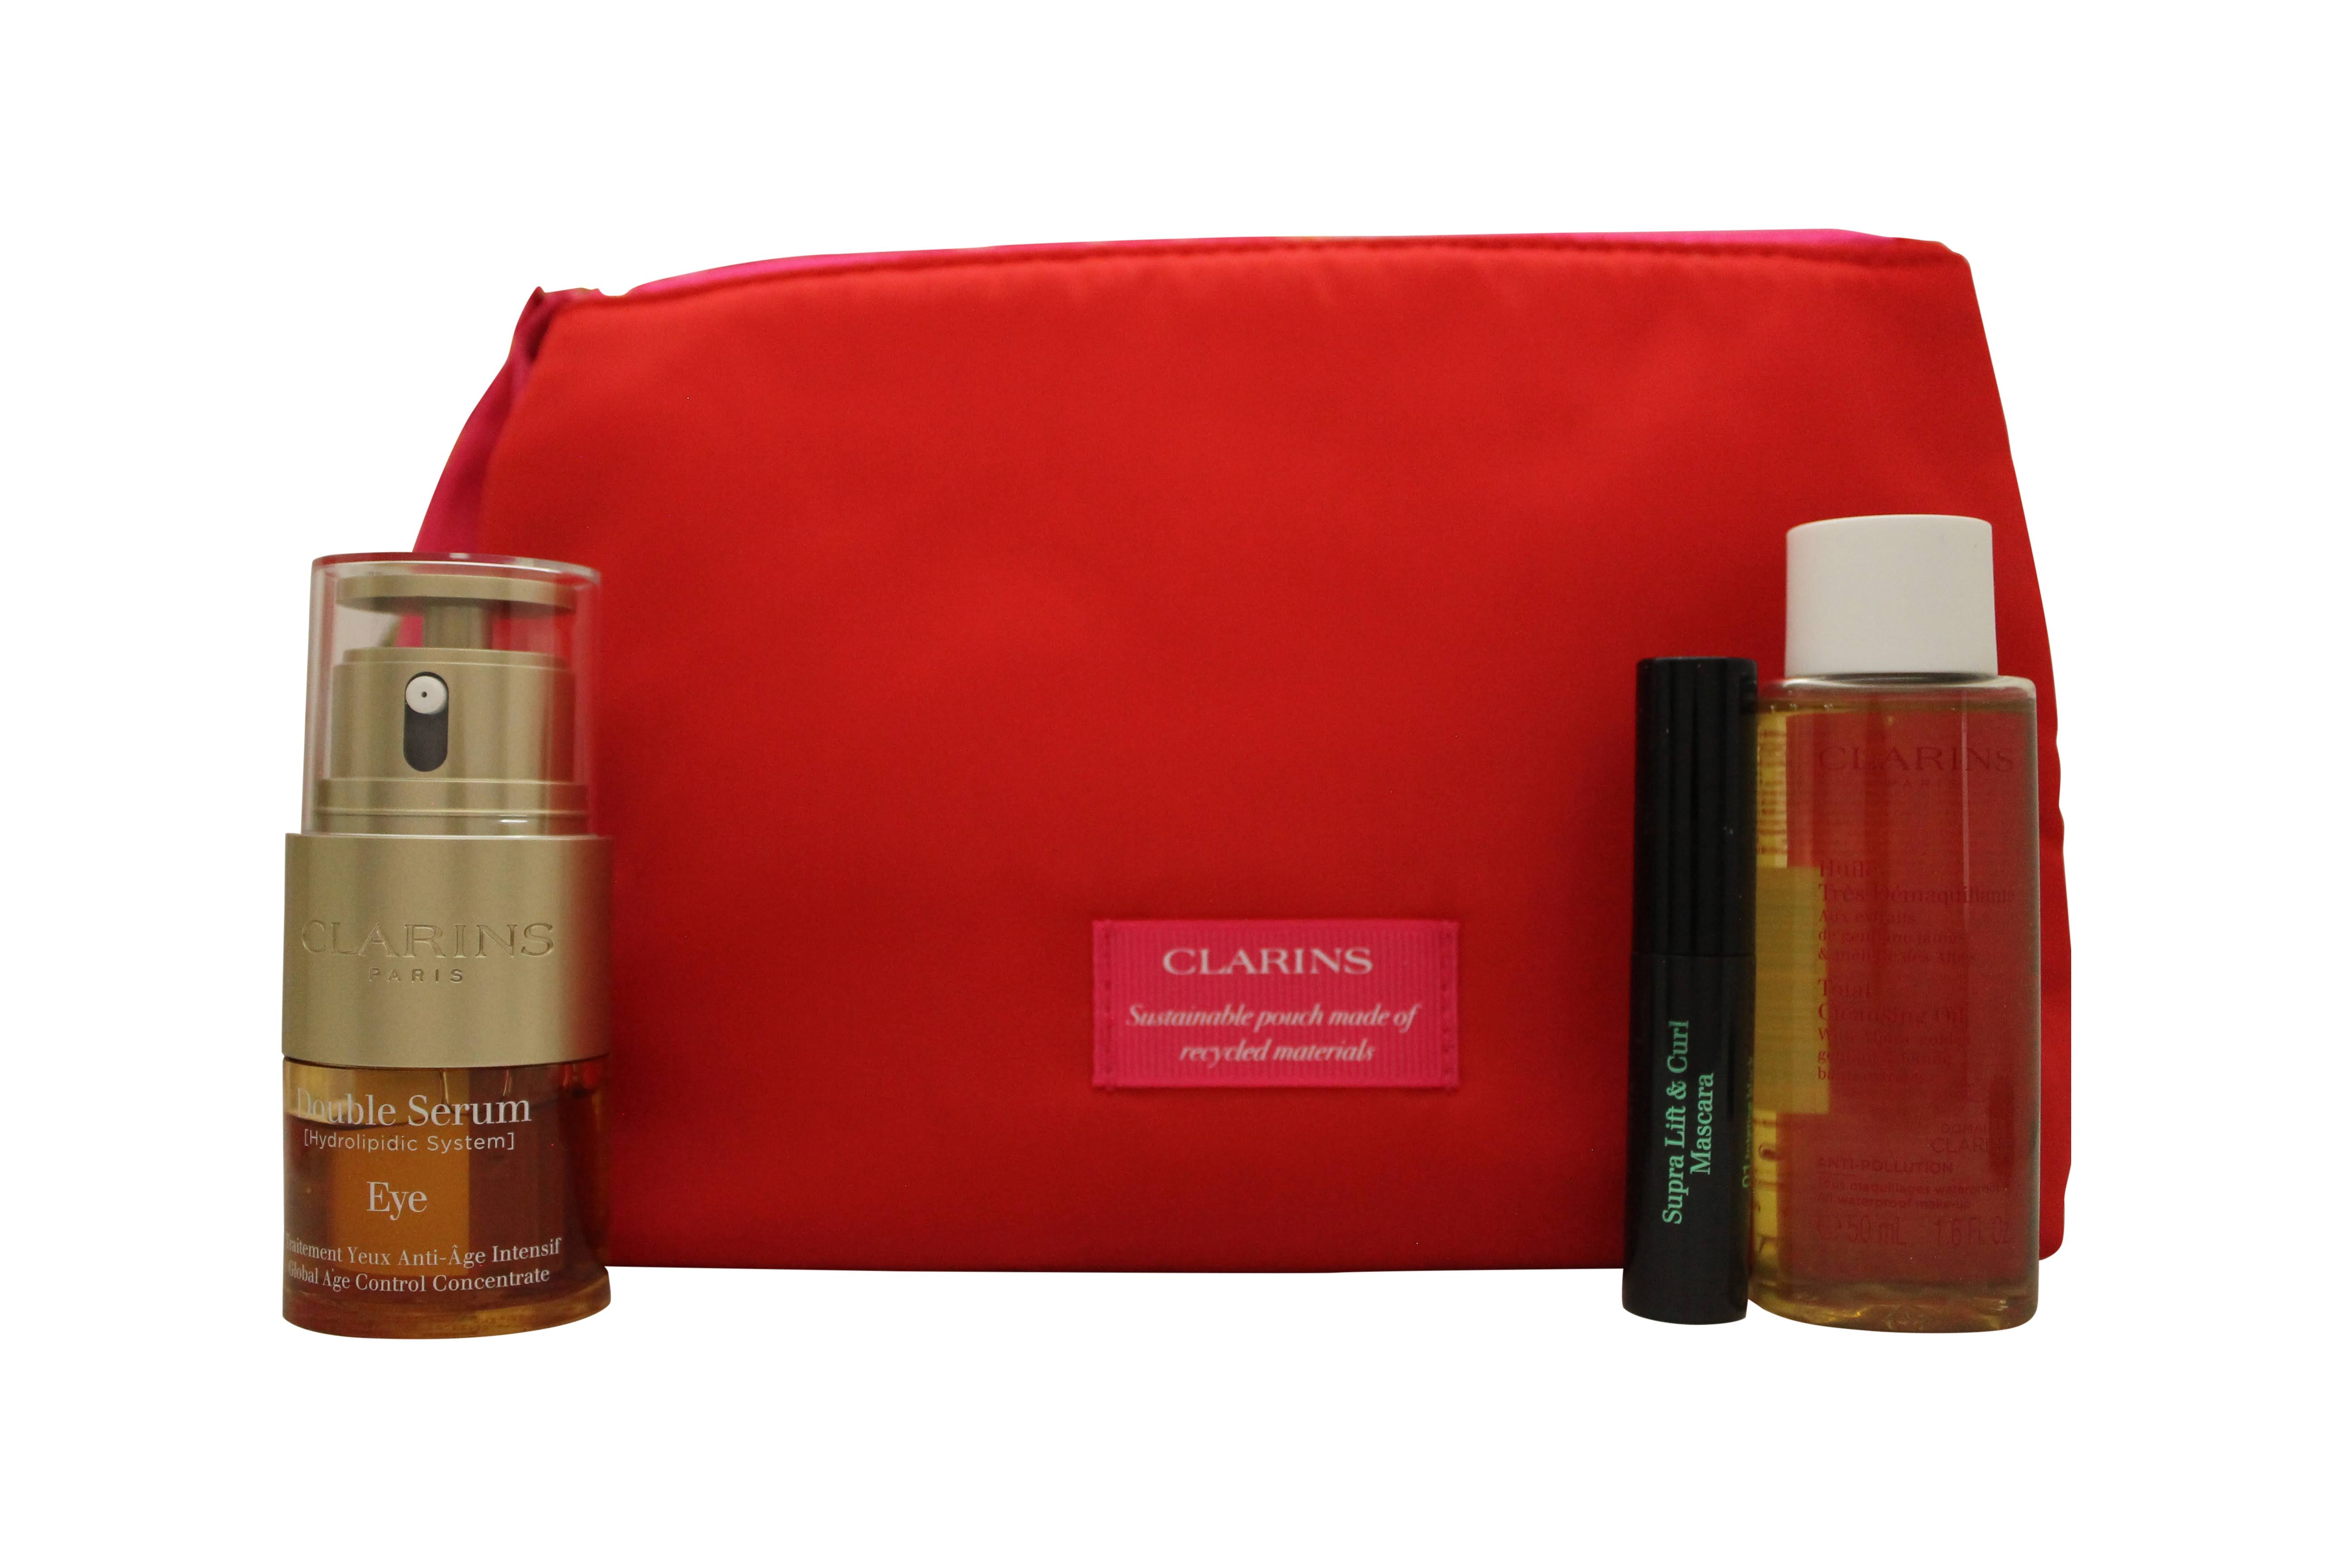 Clarins Double Serum Eye Collection Gift Set